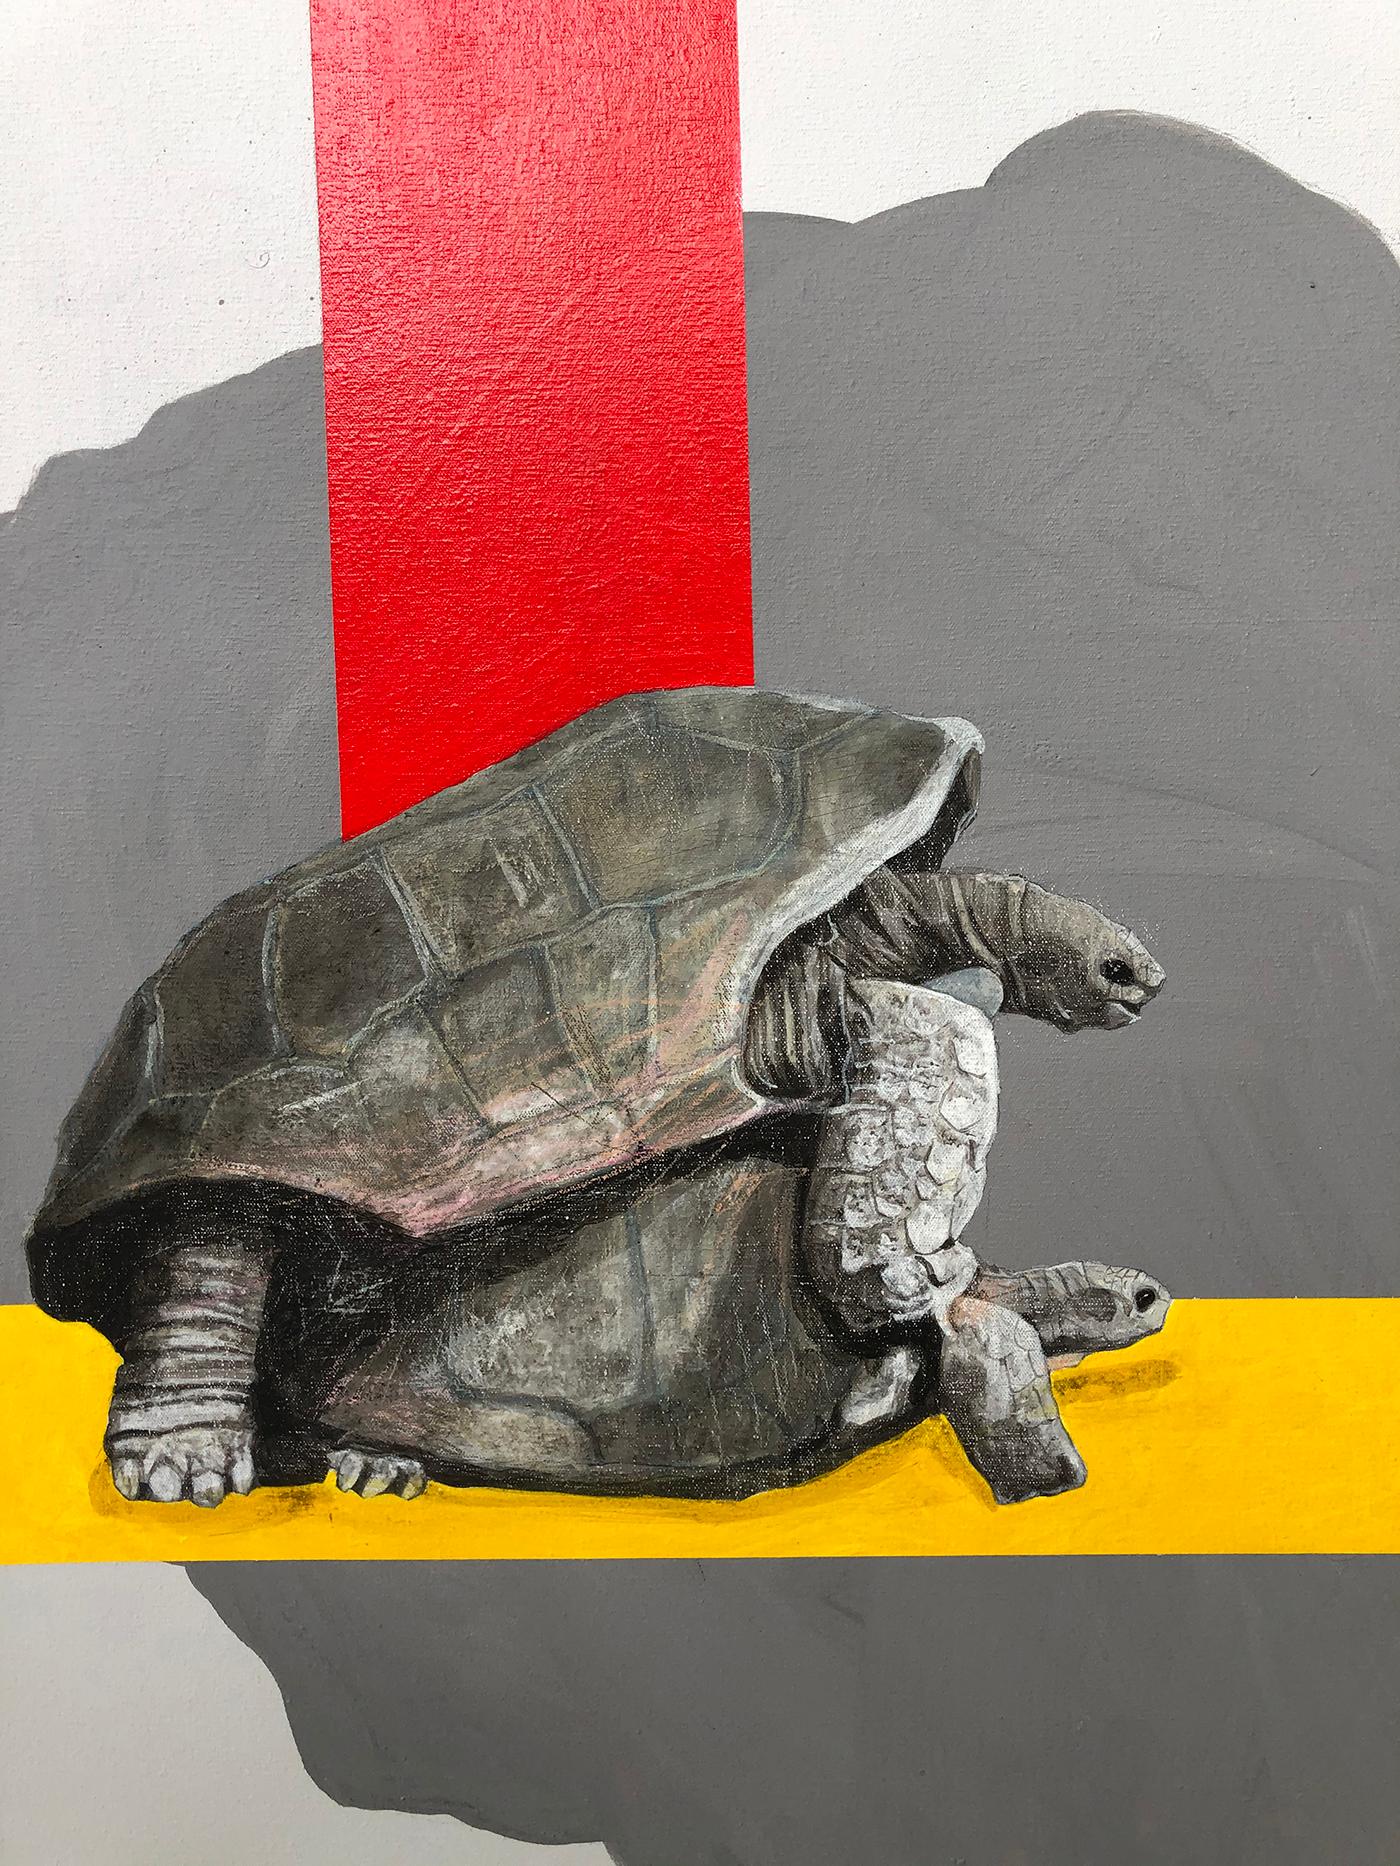 Tortugas 2020 - Painting by Mateo Andrea